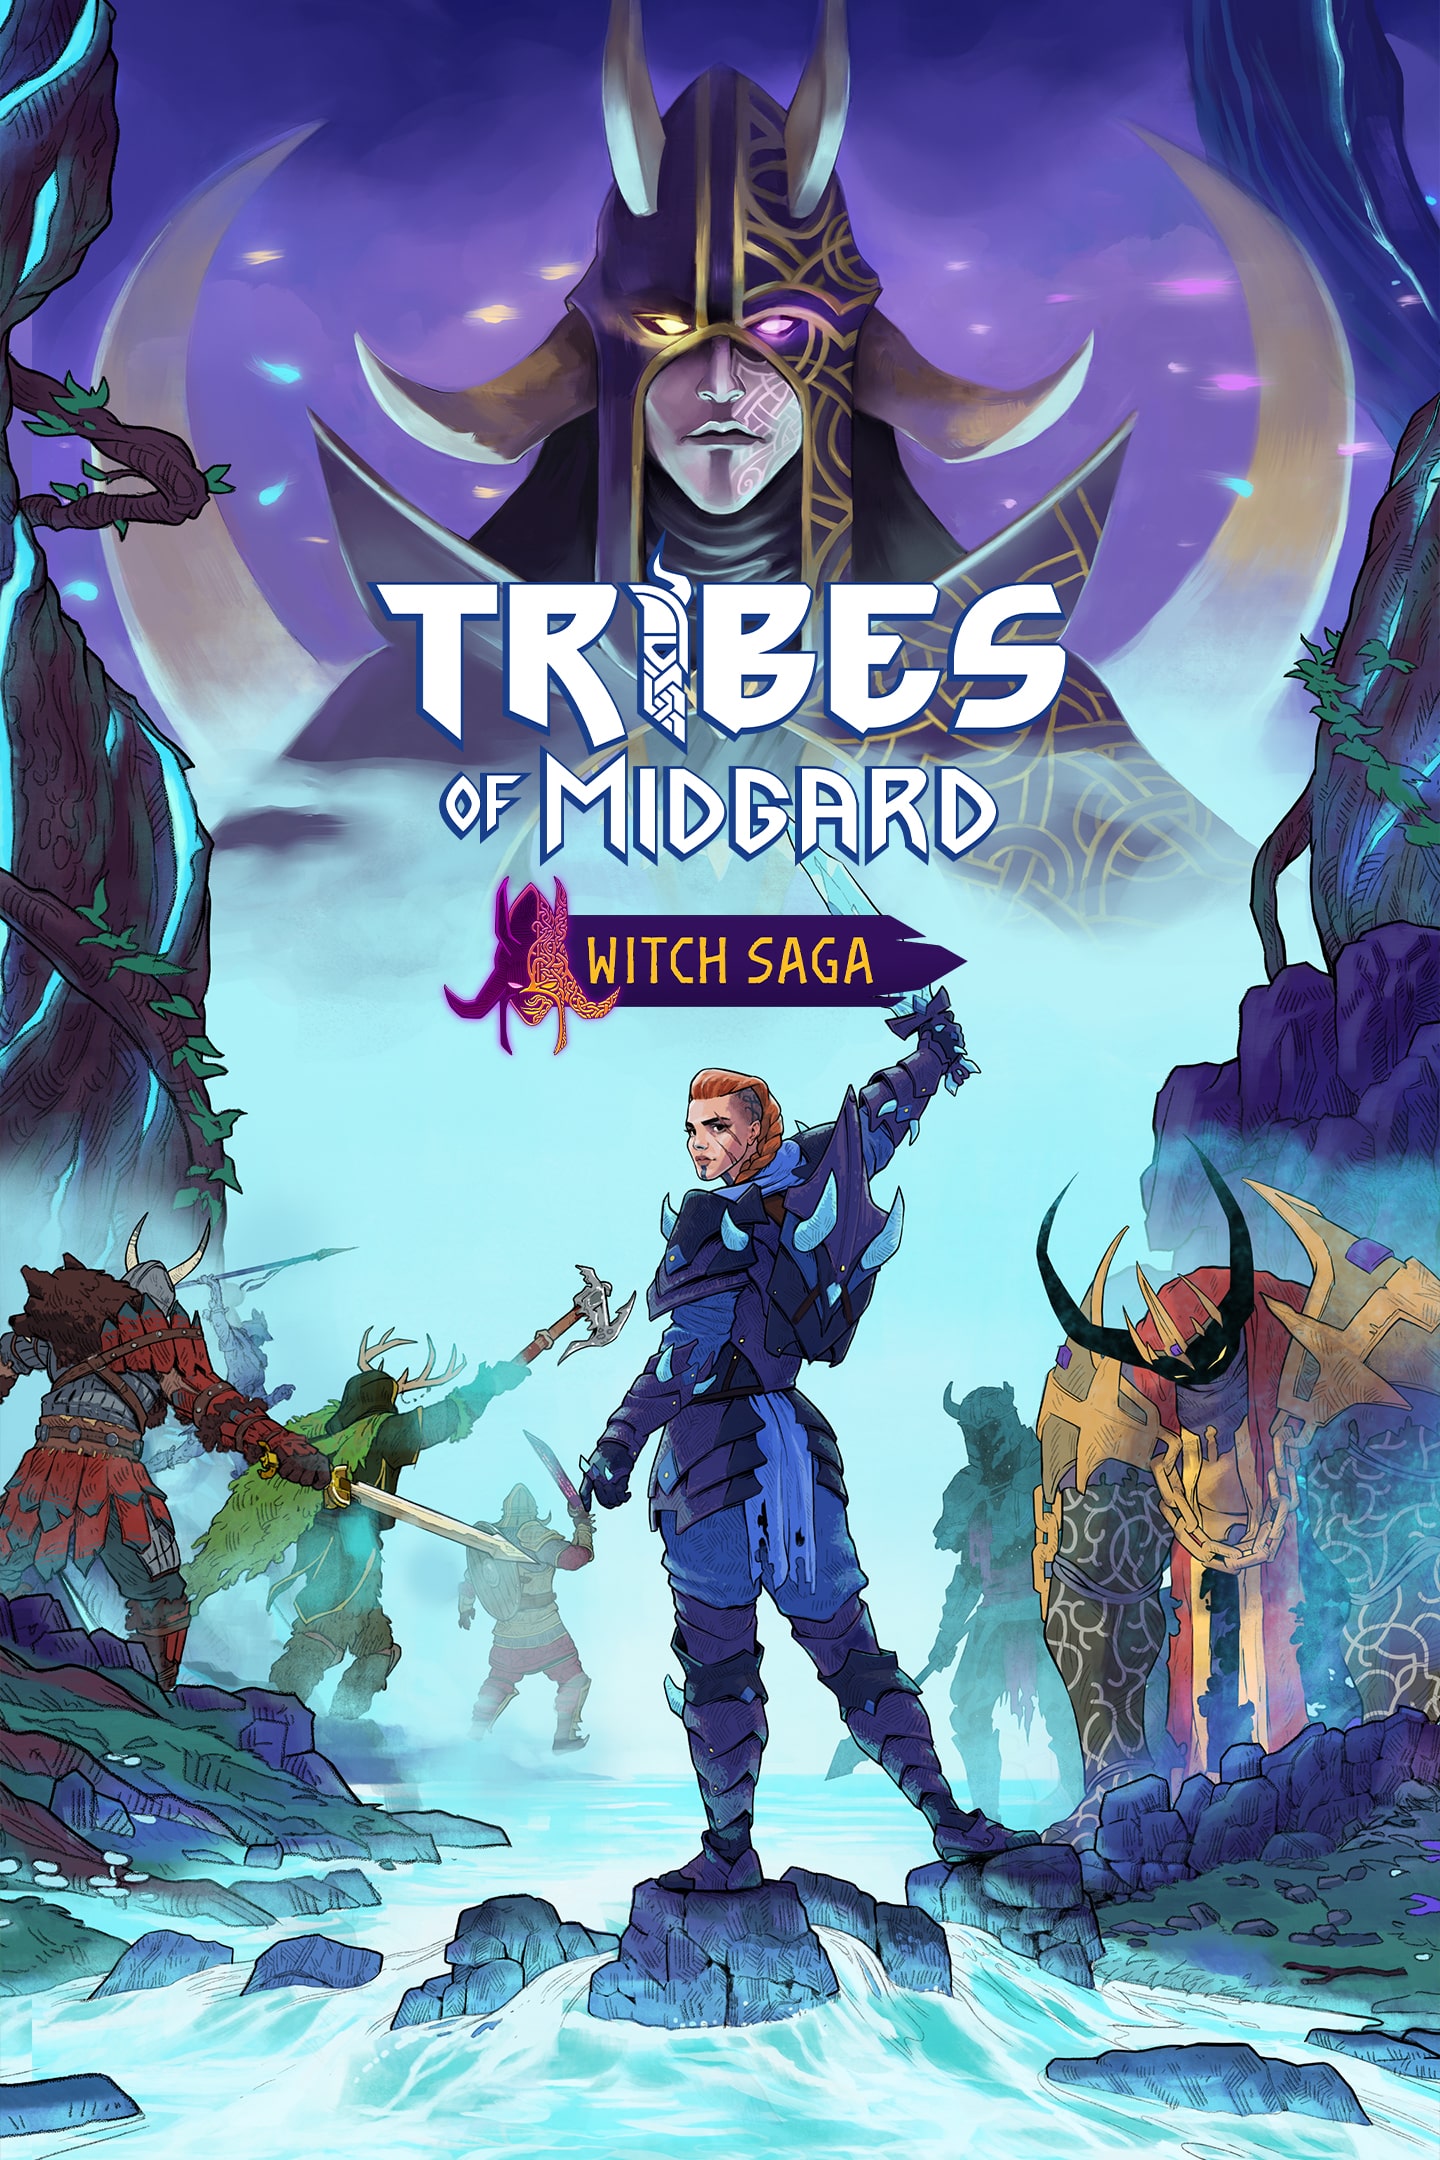 Tribes of Midgard: Deluxe Edition - PlayStation 4 